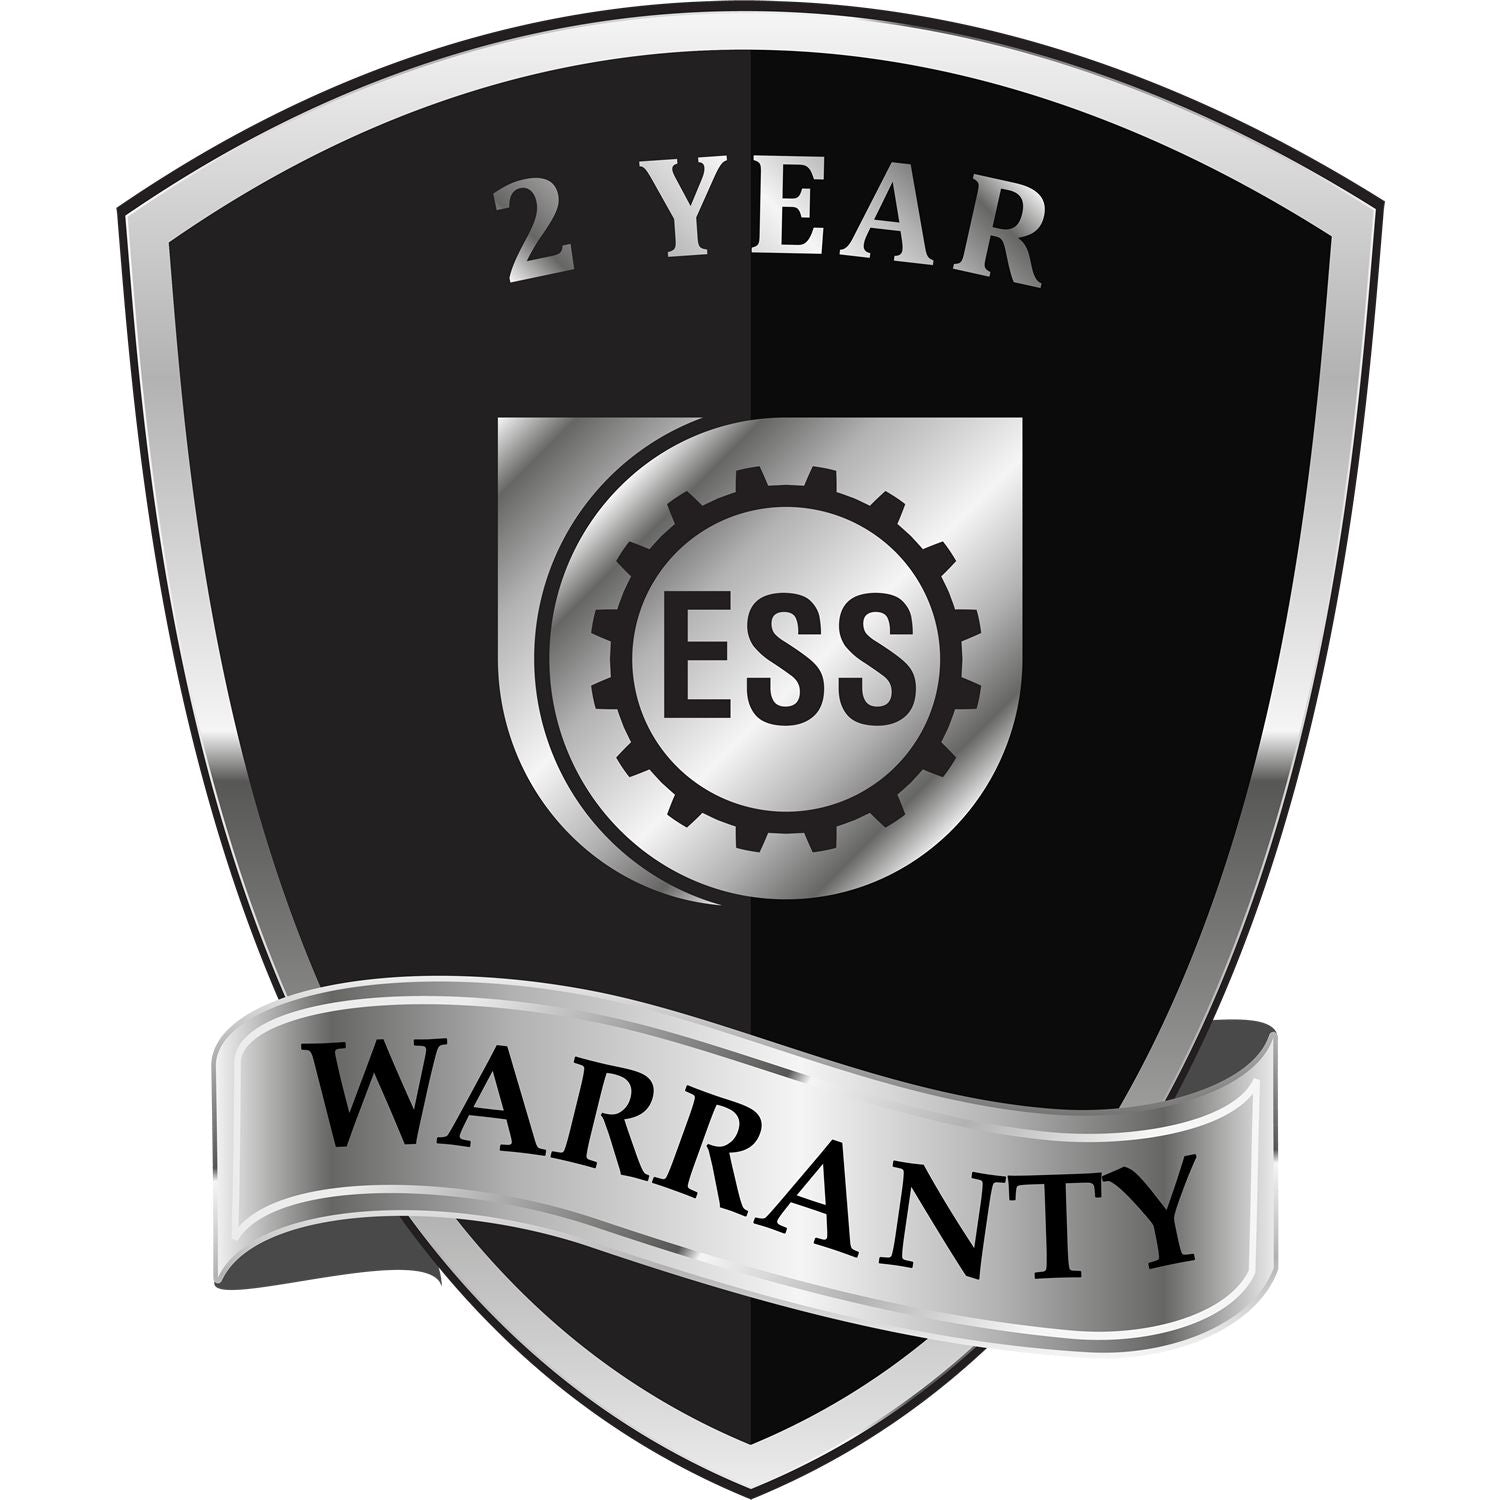 A black and silver badge or emblem showing warranty information for the Gift Colorado Engineer Seal